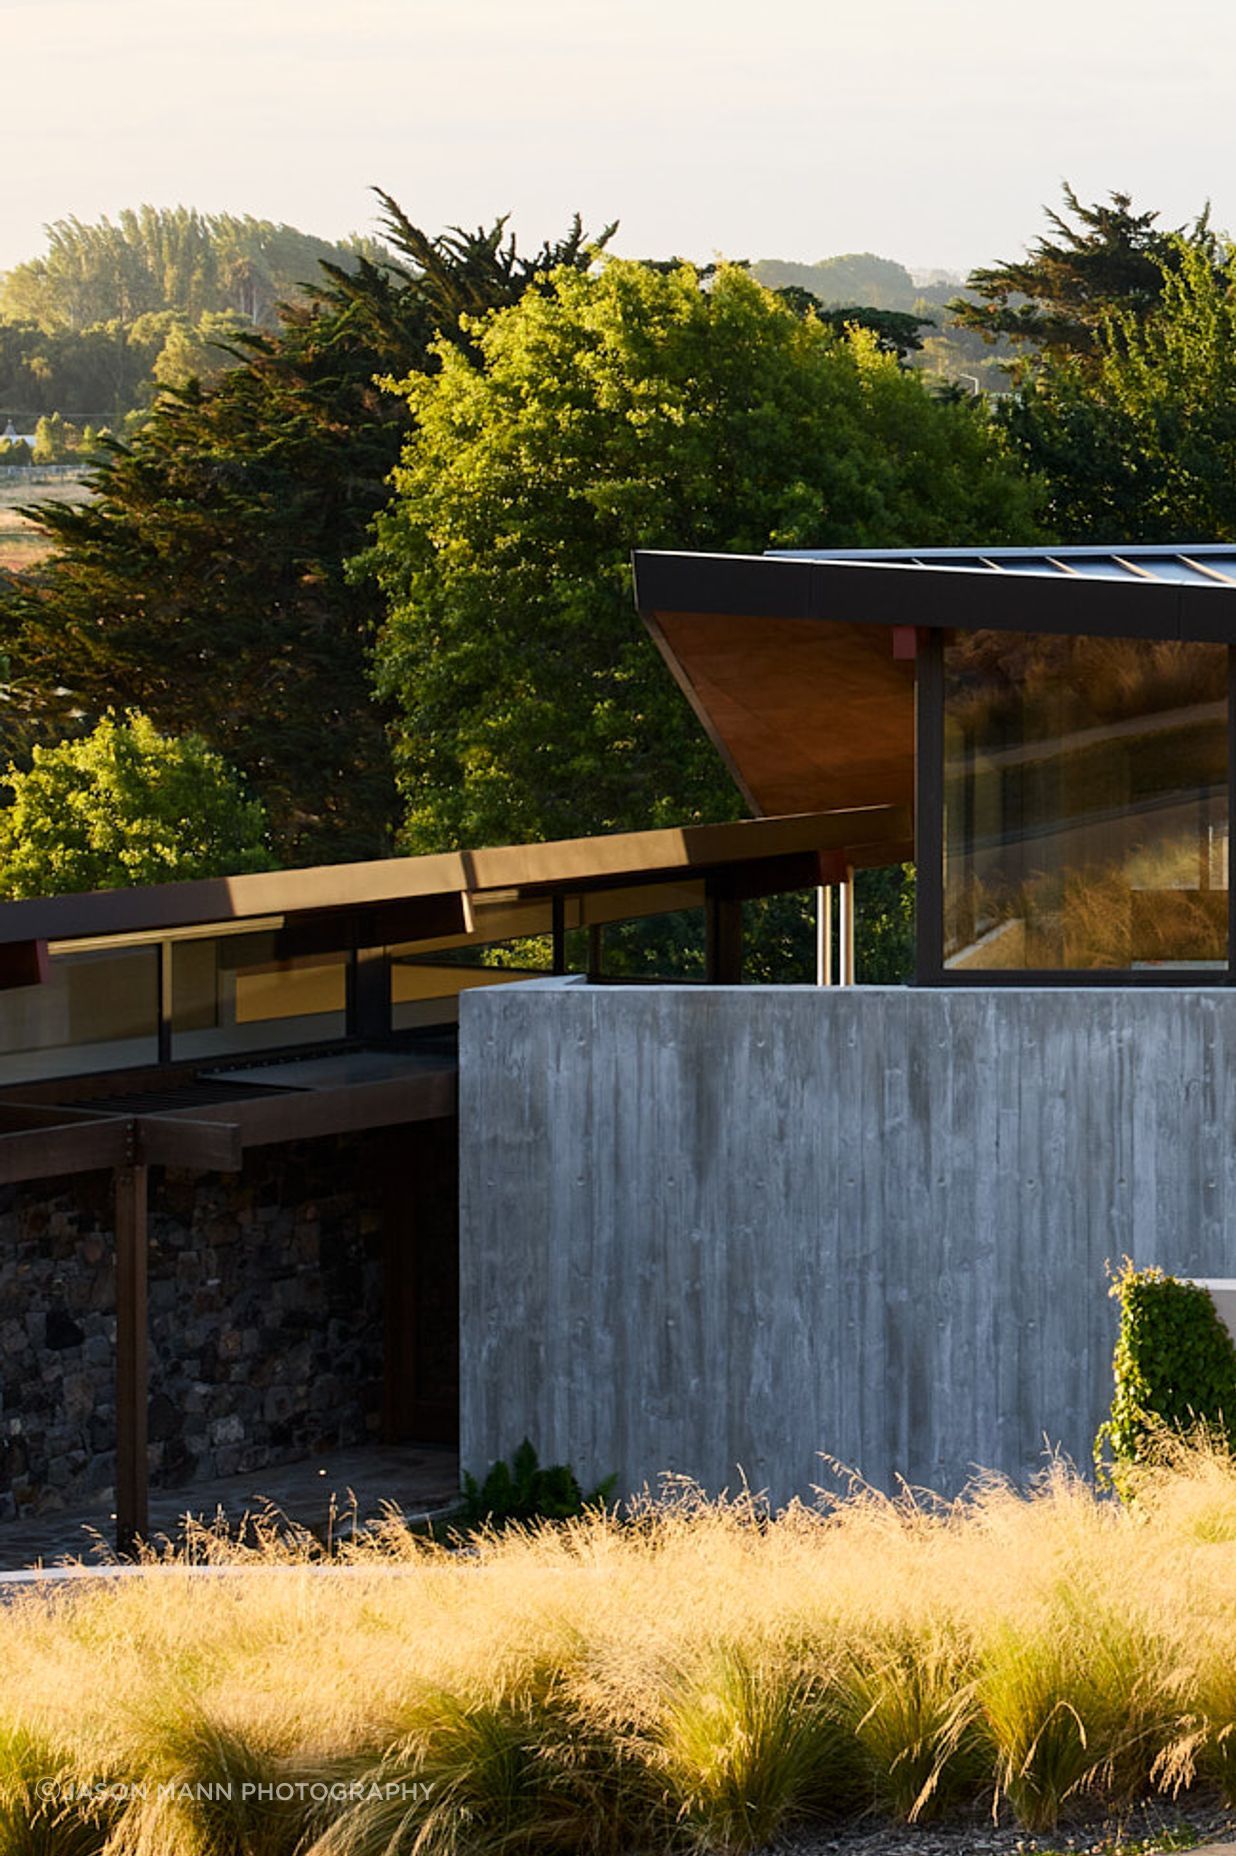 The home is embedded into the gently sloping site, anchored by heavy materials.